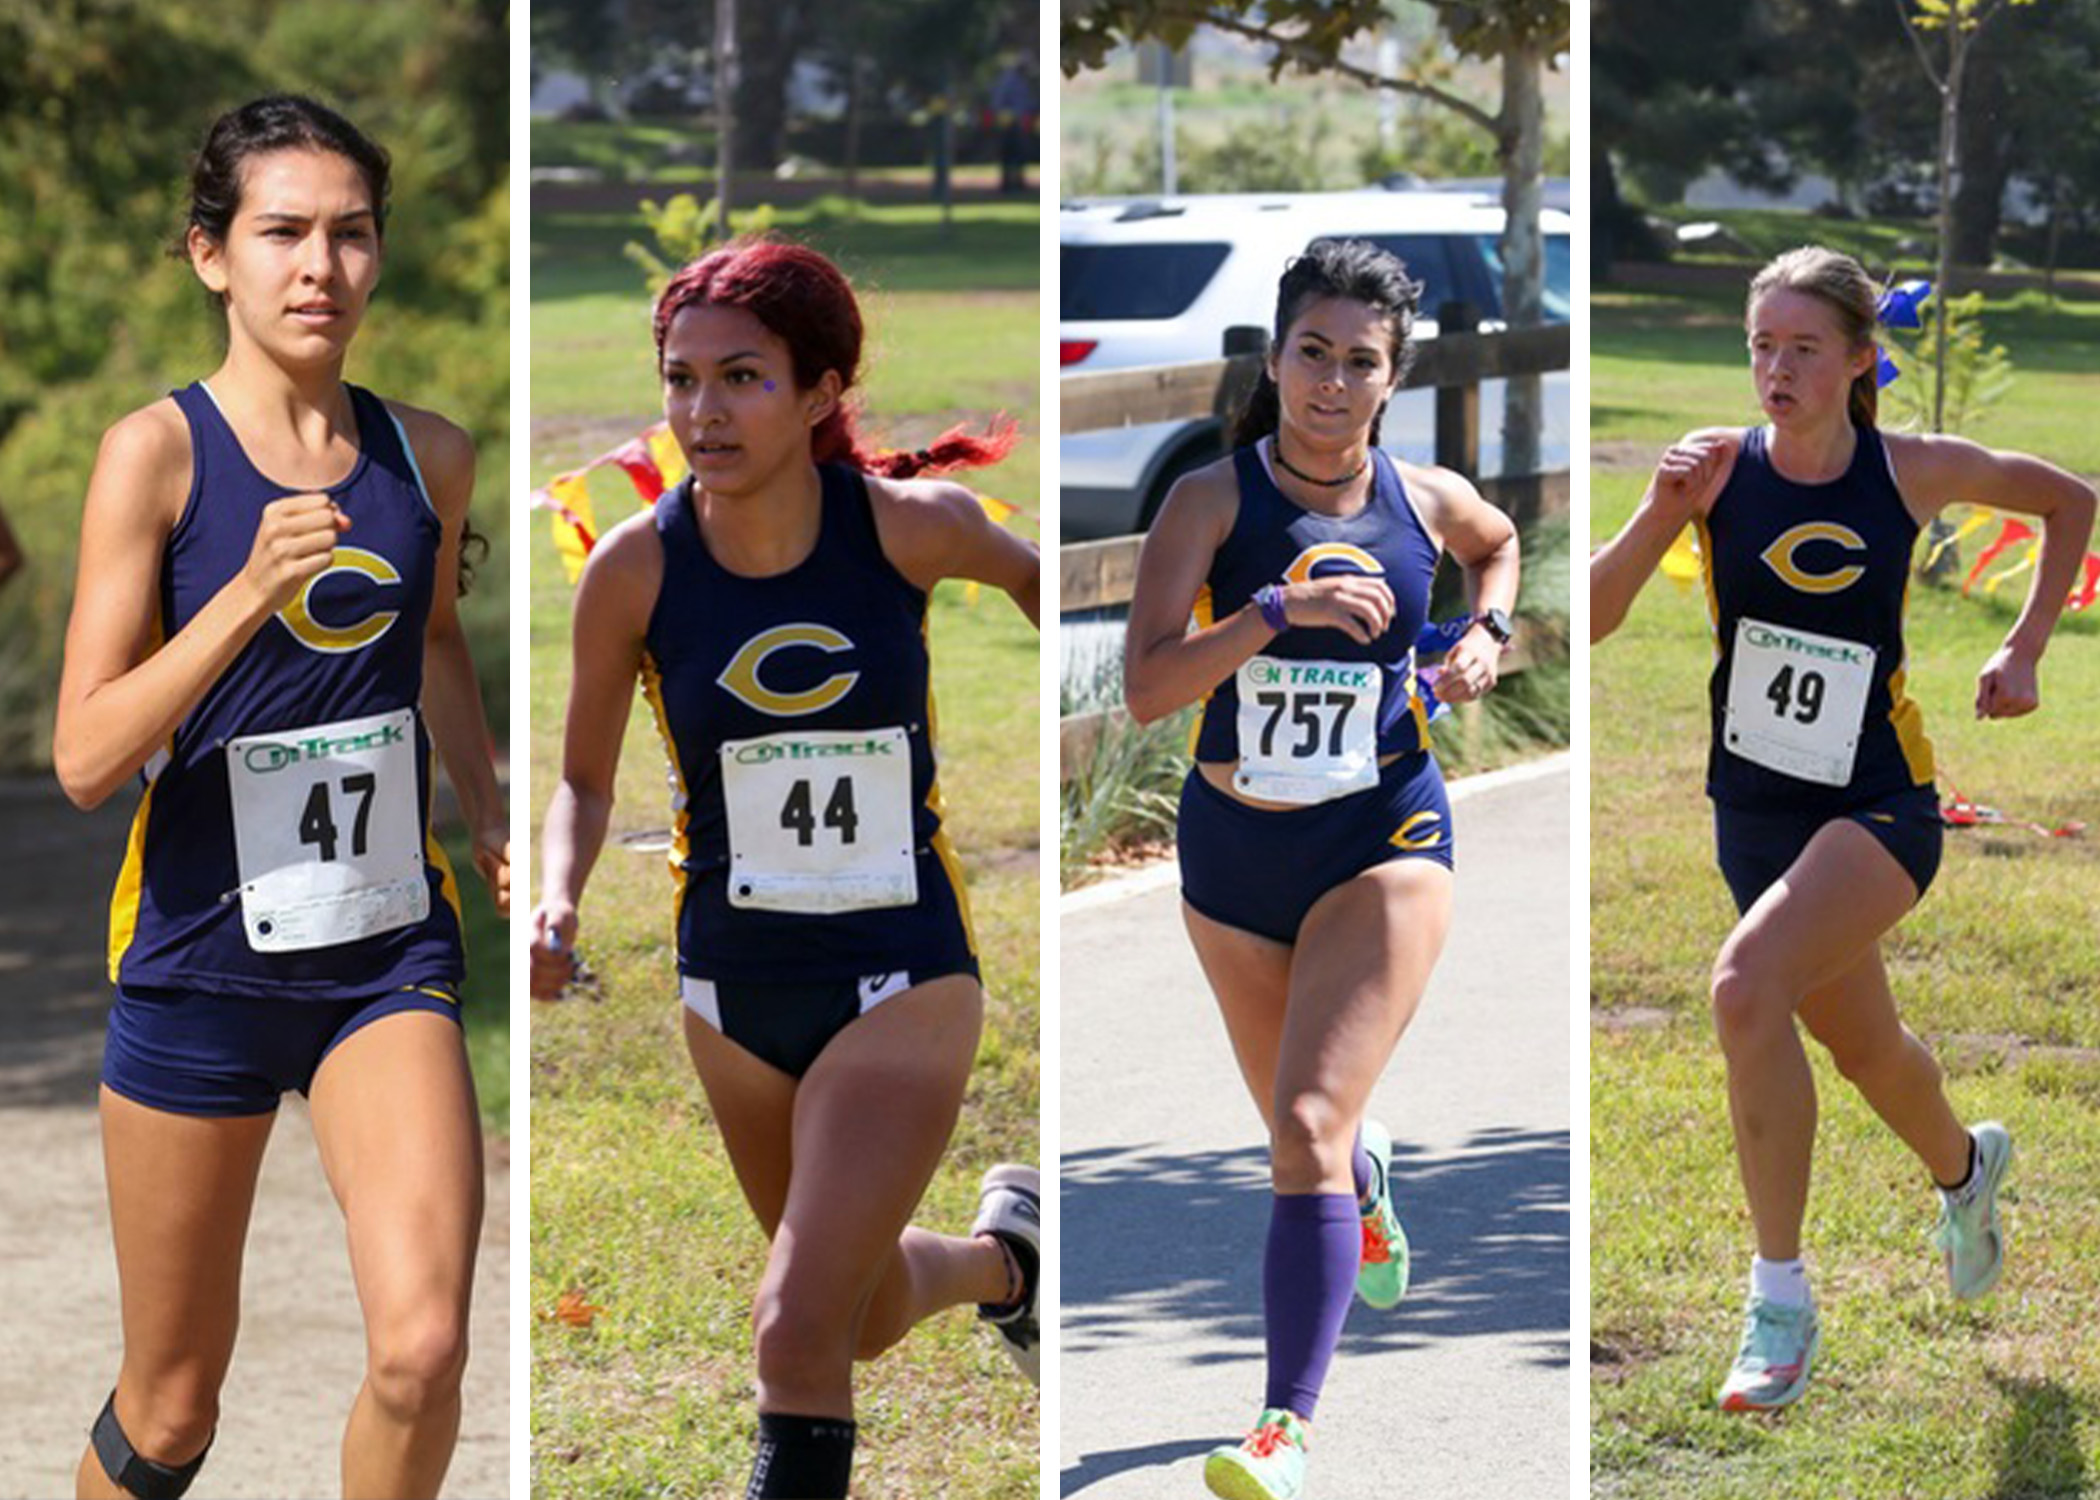 (from left to right CCCAA Women's Cross Country Individual State Champion Danielle Salcedo was named the Western State Conference (WSC) Female Runner of the Year to headline a class of six Cougars earning all-conference honors. COC freshman Milca Osorio, sophomore Sarah Zamudio and freshman Trinity Winslow were also included among the honorees. &mdash; Jesse Mu&ntilde;oz/COC Sports Information